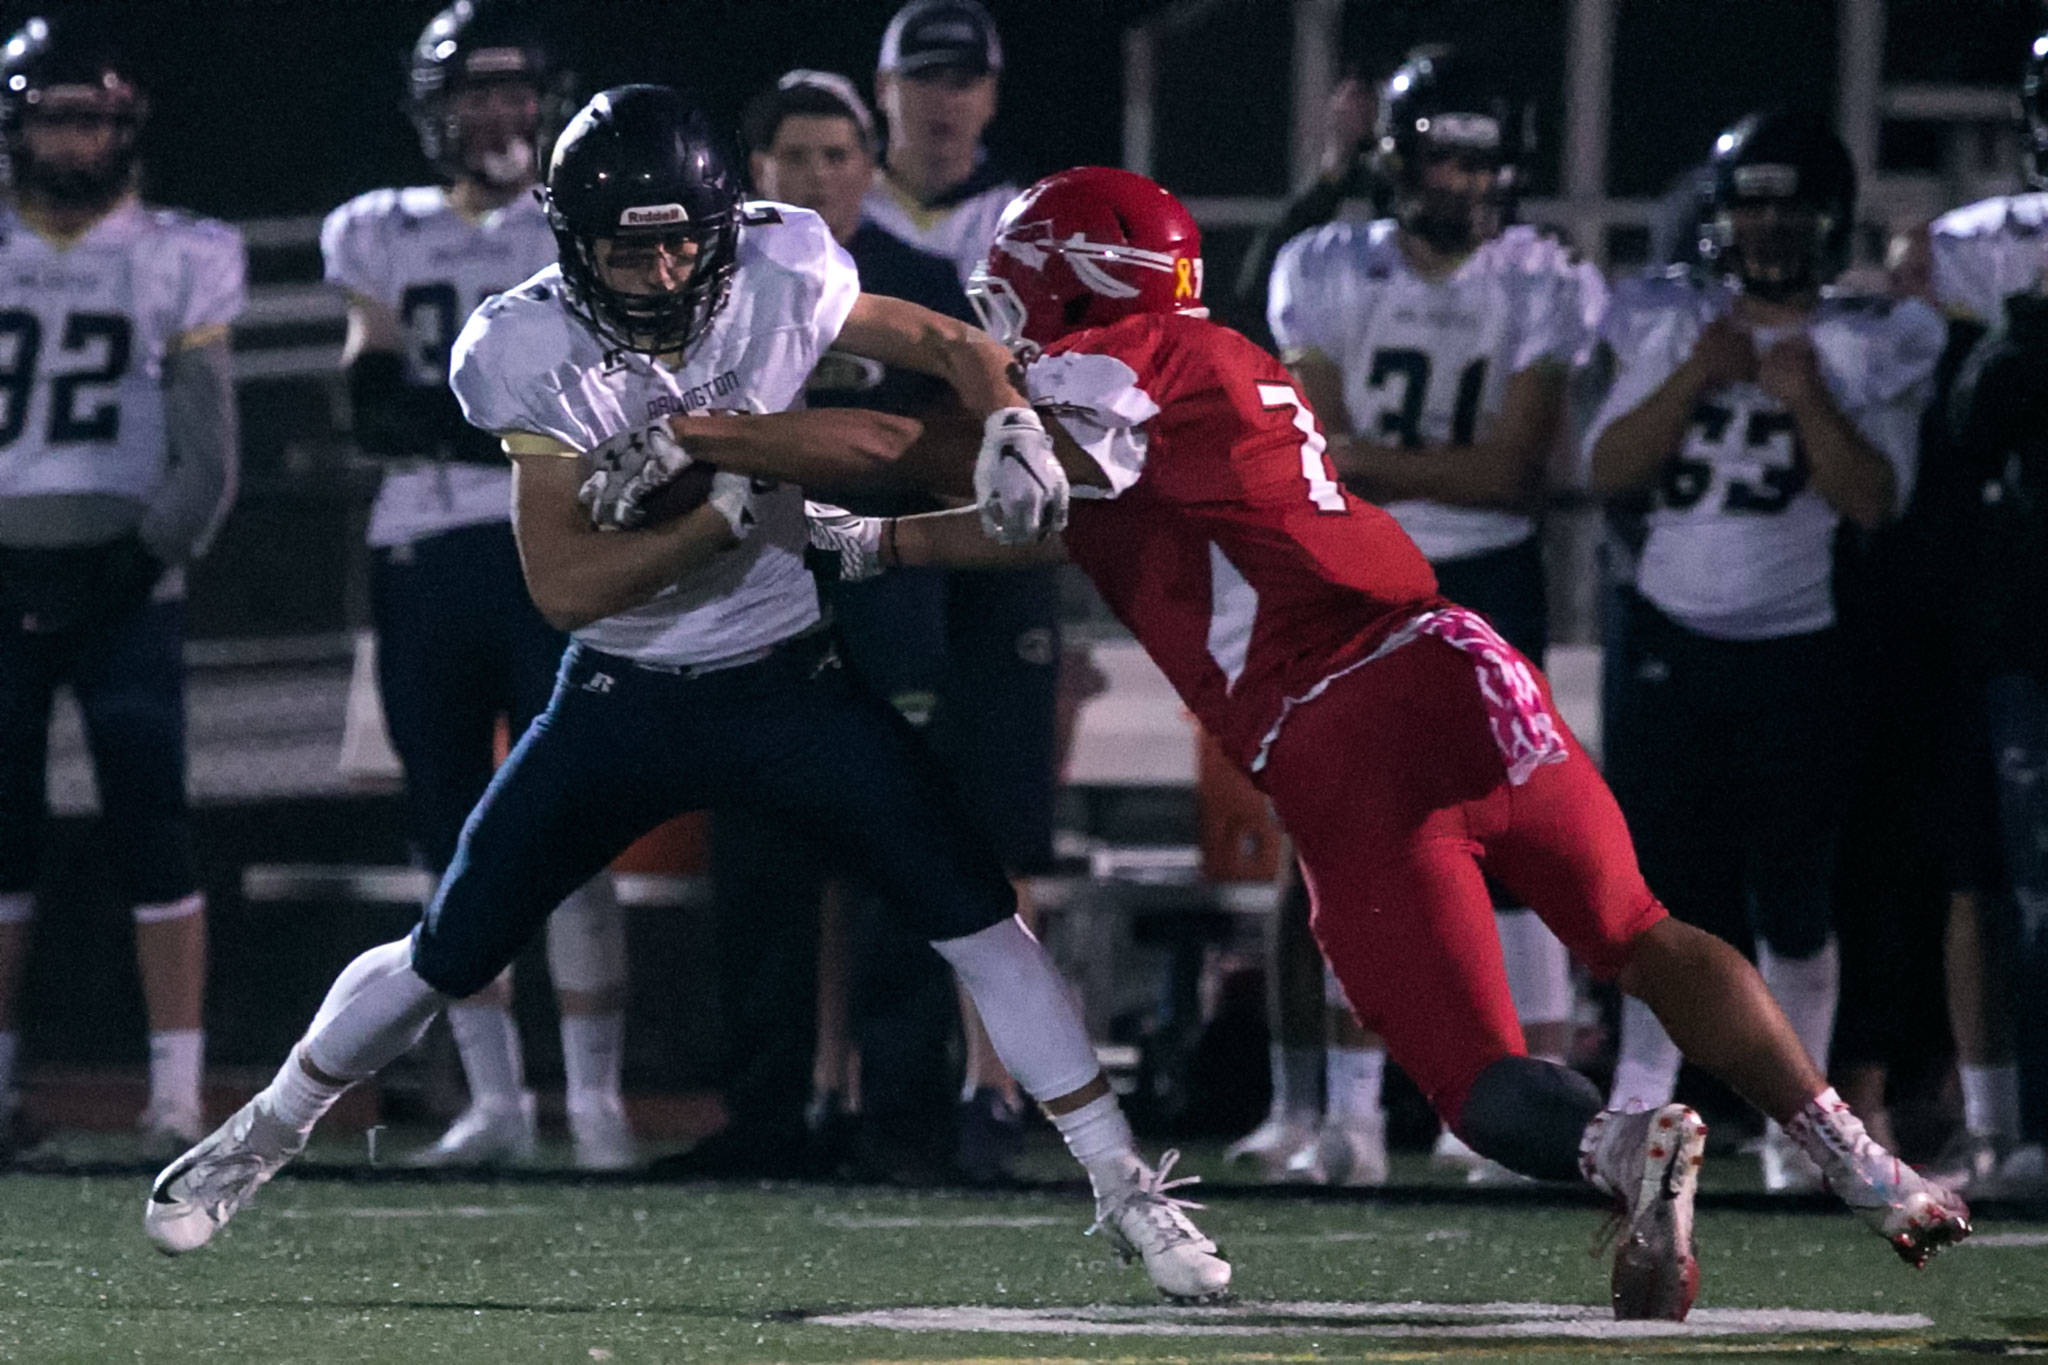 Arlington’s Bryce Petersen (left) makes a reception with Marysville Pilchuck’s Jared Kelly defending during a game on Oct. 19, 2018, at Quil Ceda Stadium in Marysville. (Kevin Clark / The Herald)